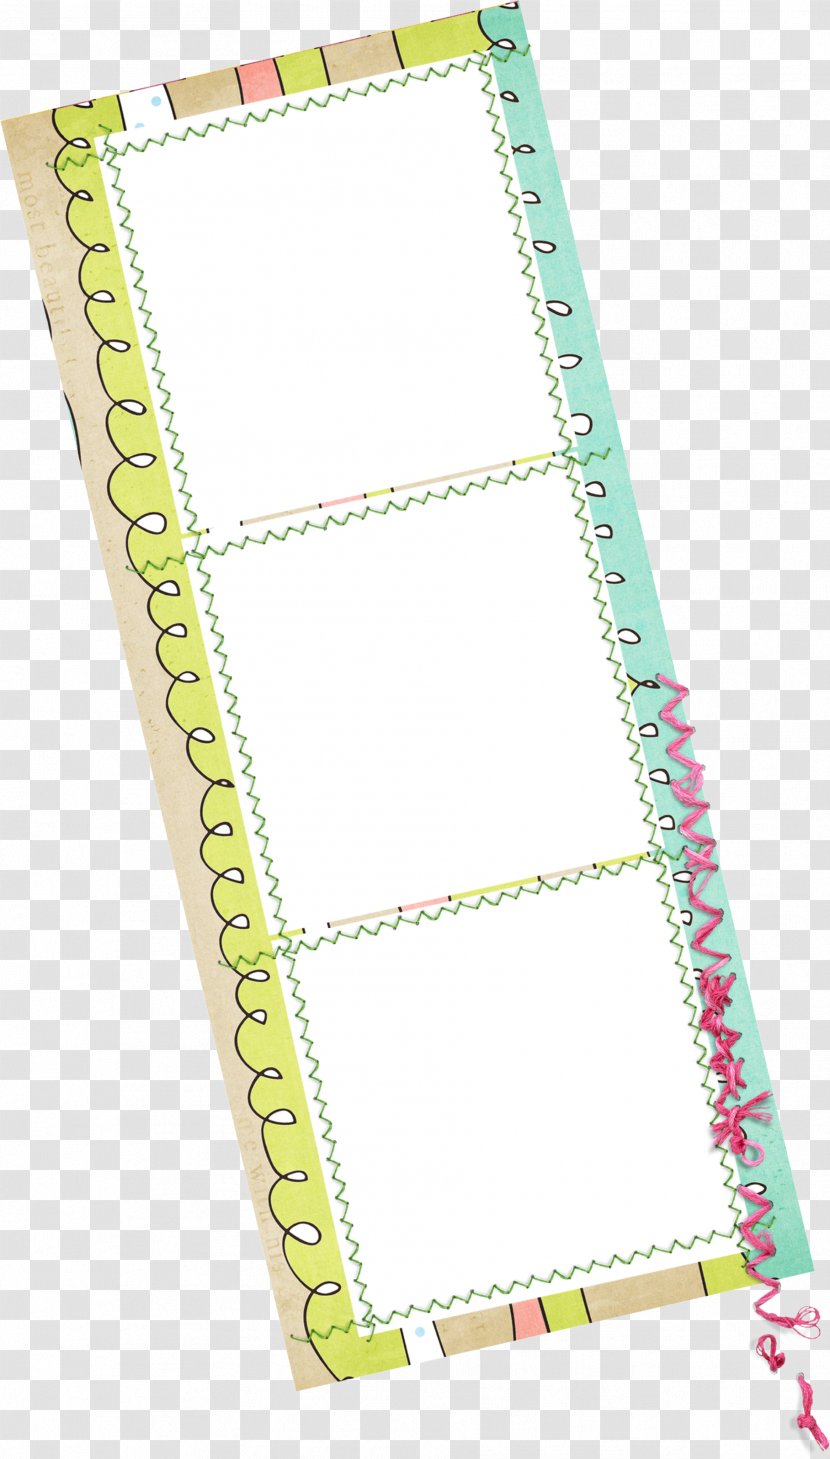 Ladder Google Images Icon - Transparency And Translucency - Small Transparent PNG